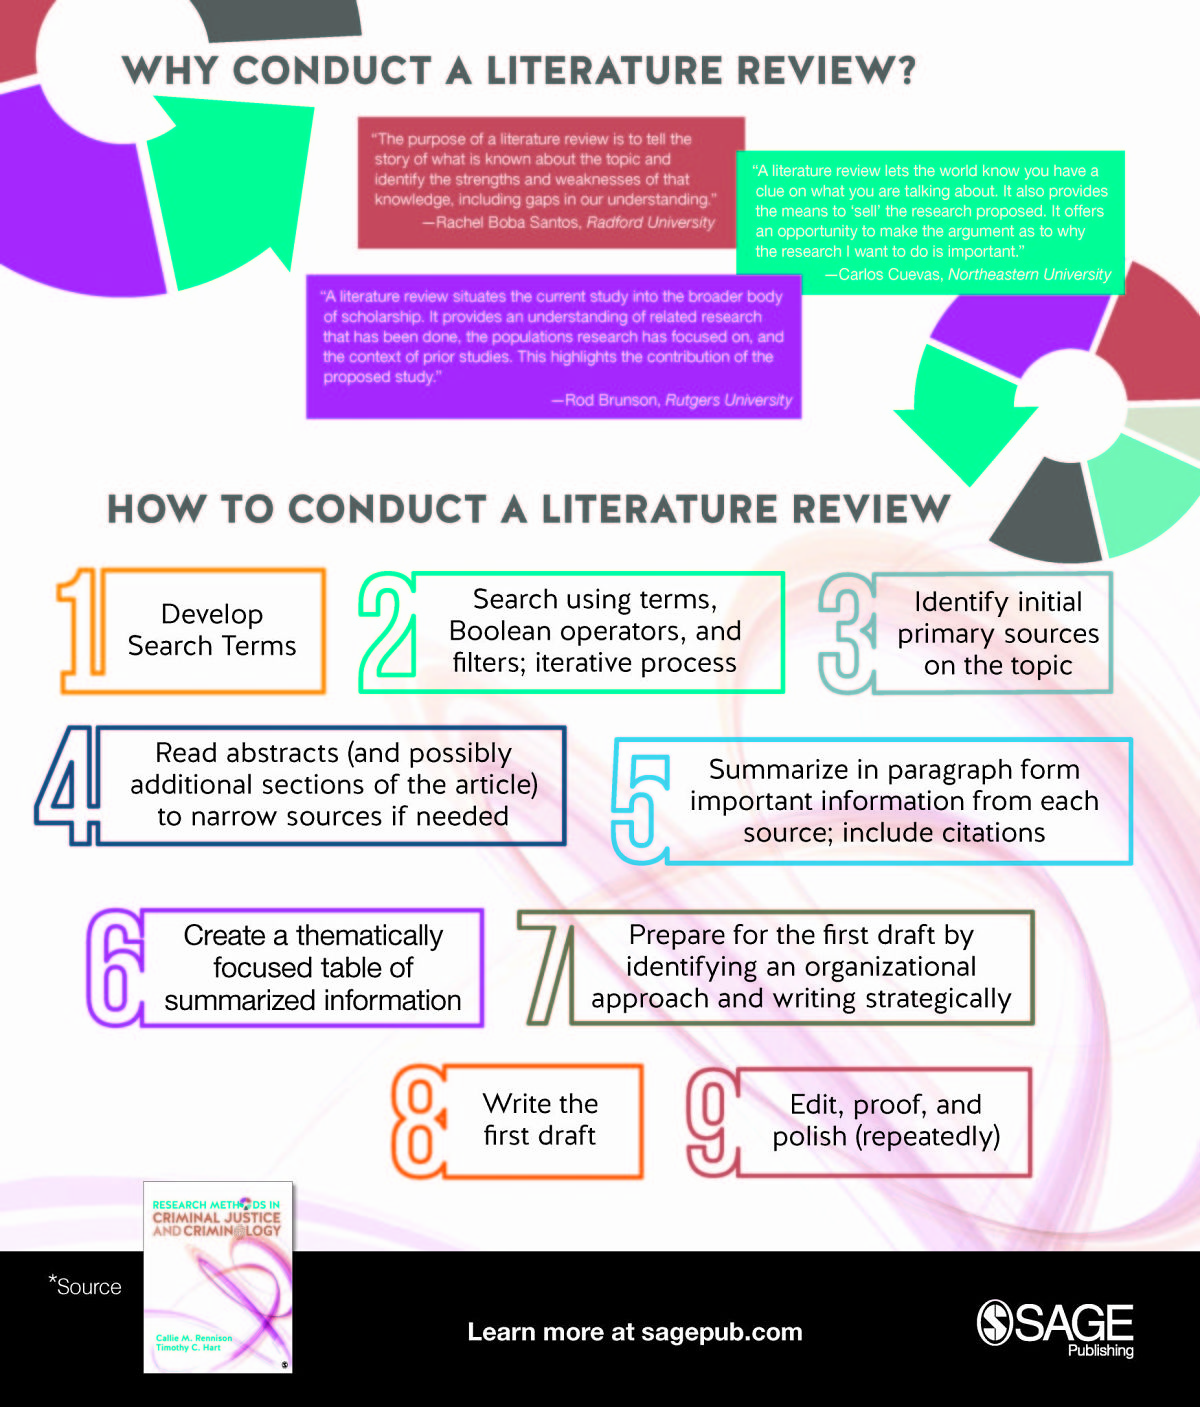 what are the different ways to conduct a literature review